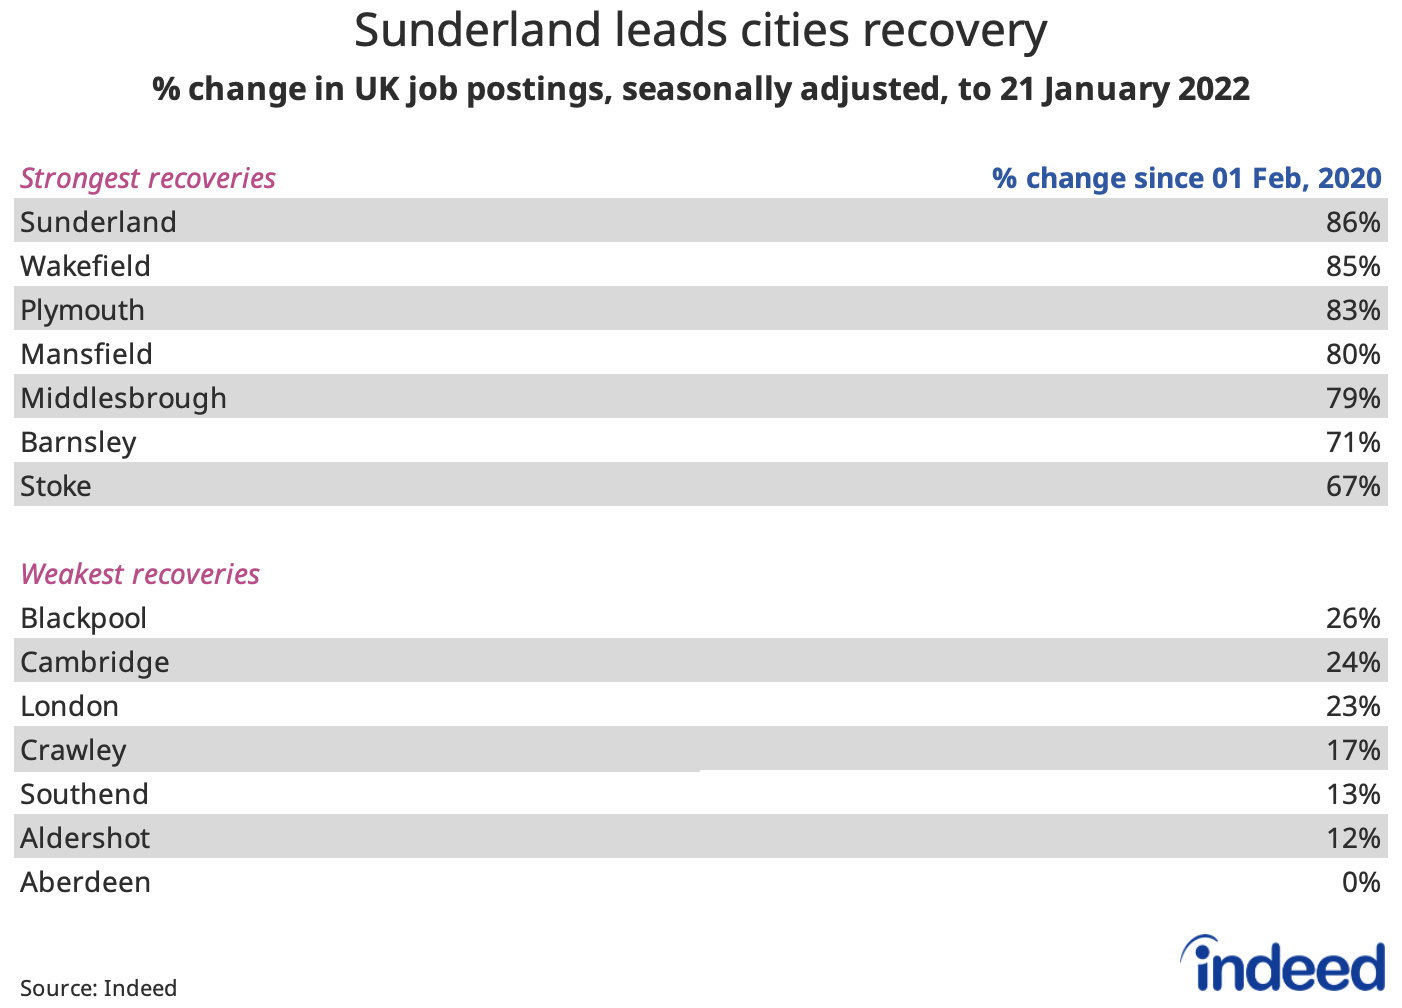 Table titled “Sunderland leads cities recovery.”